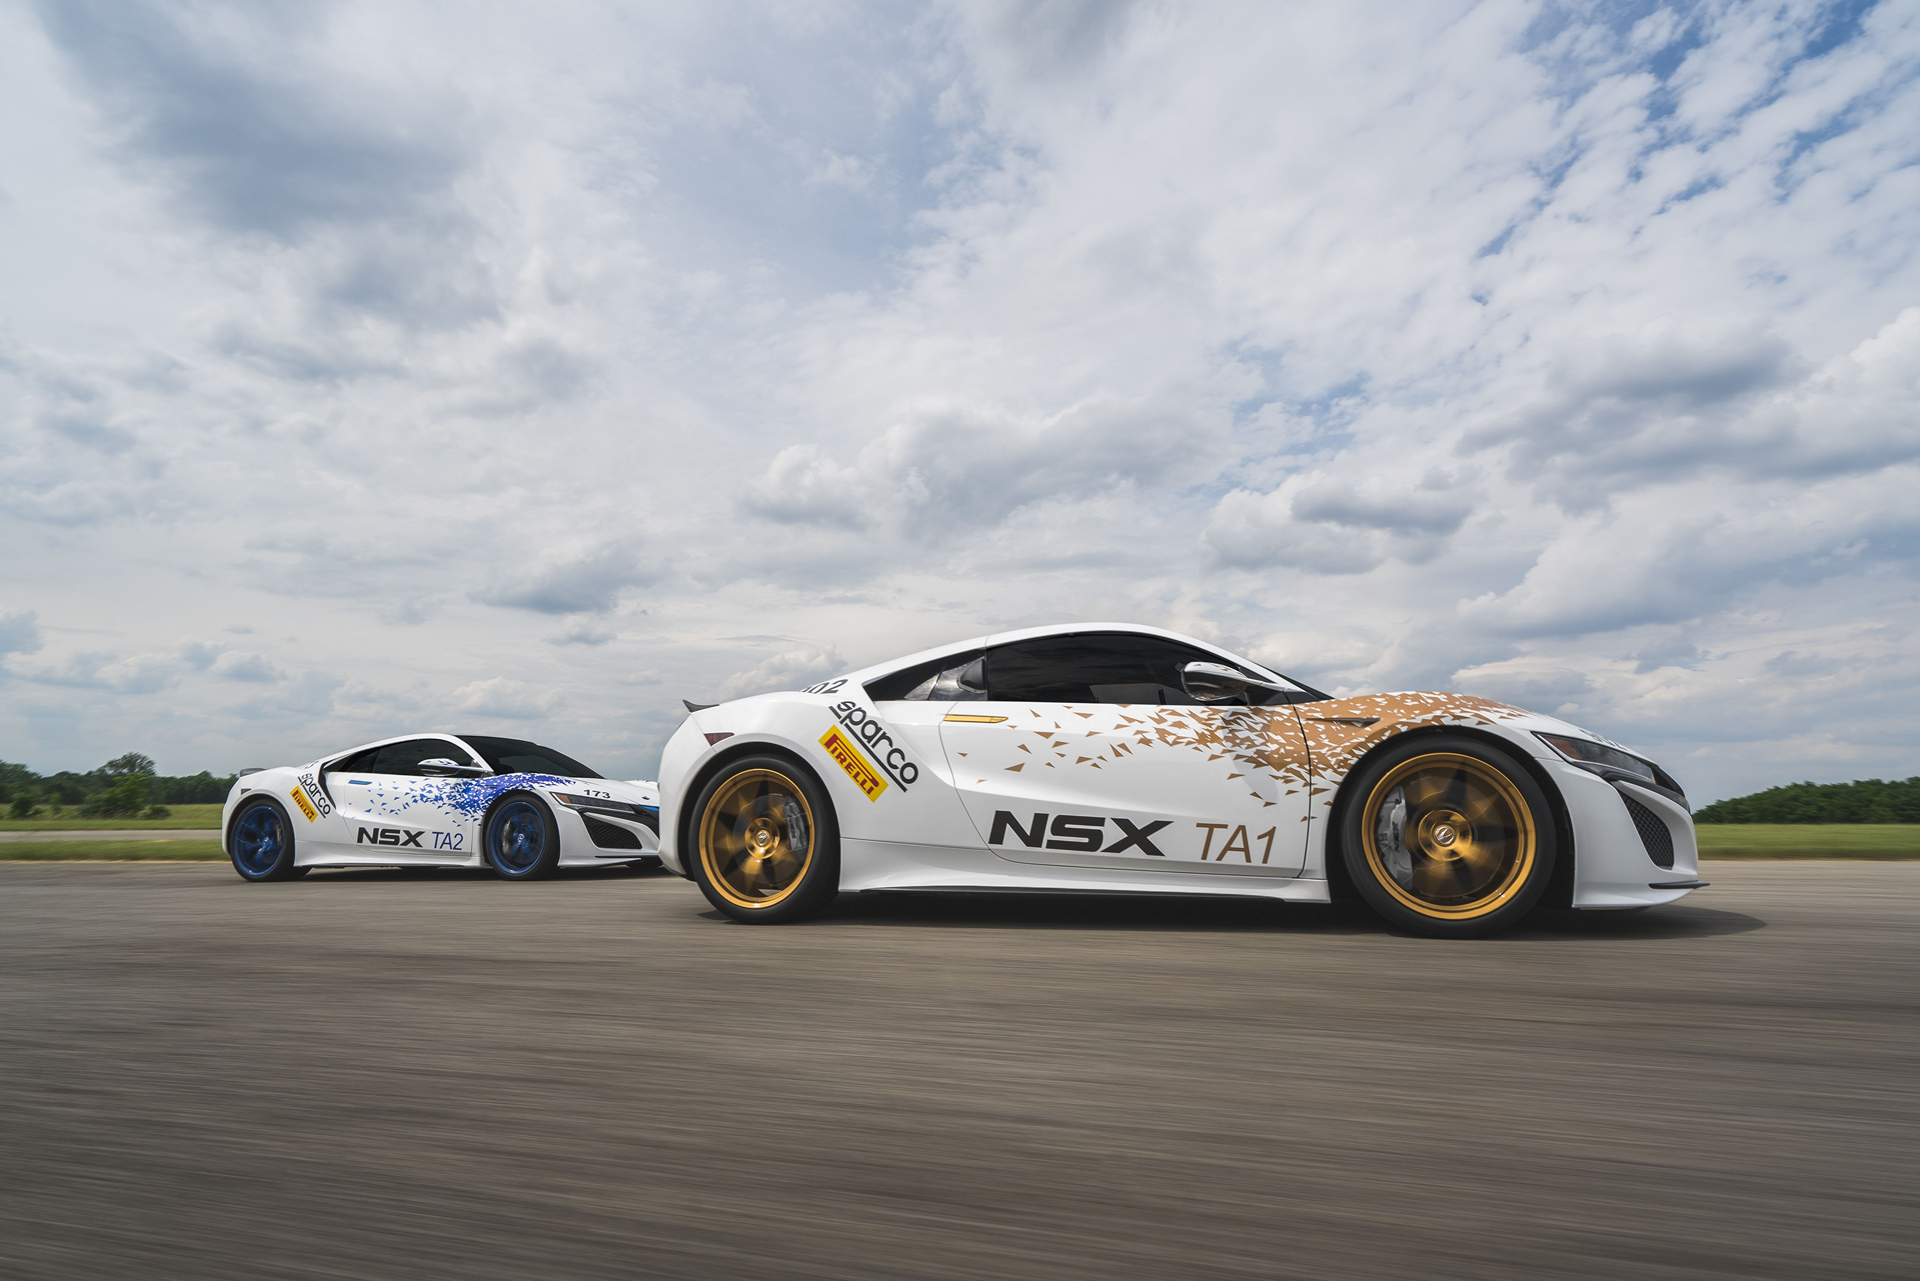 Acura NSX Time Attack 1 and 2 Vehicles © Honda Motor Co., Ltd.